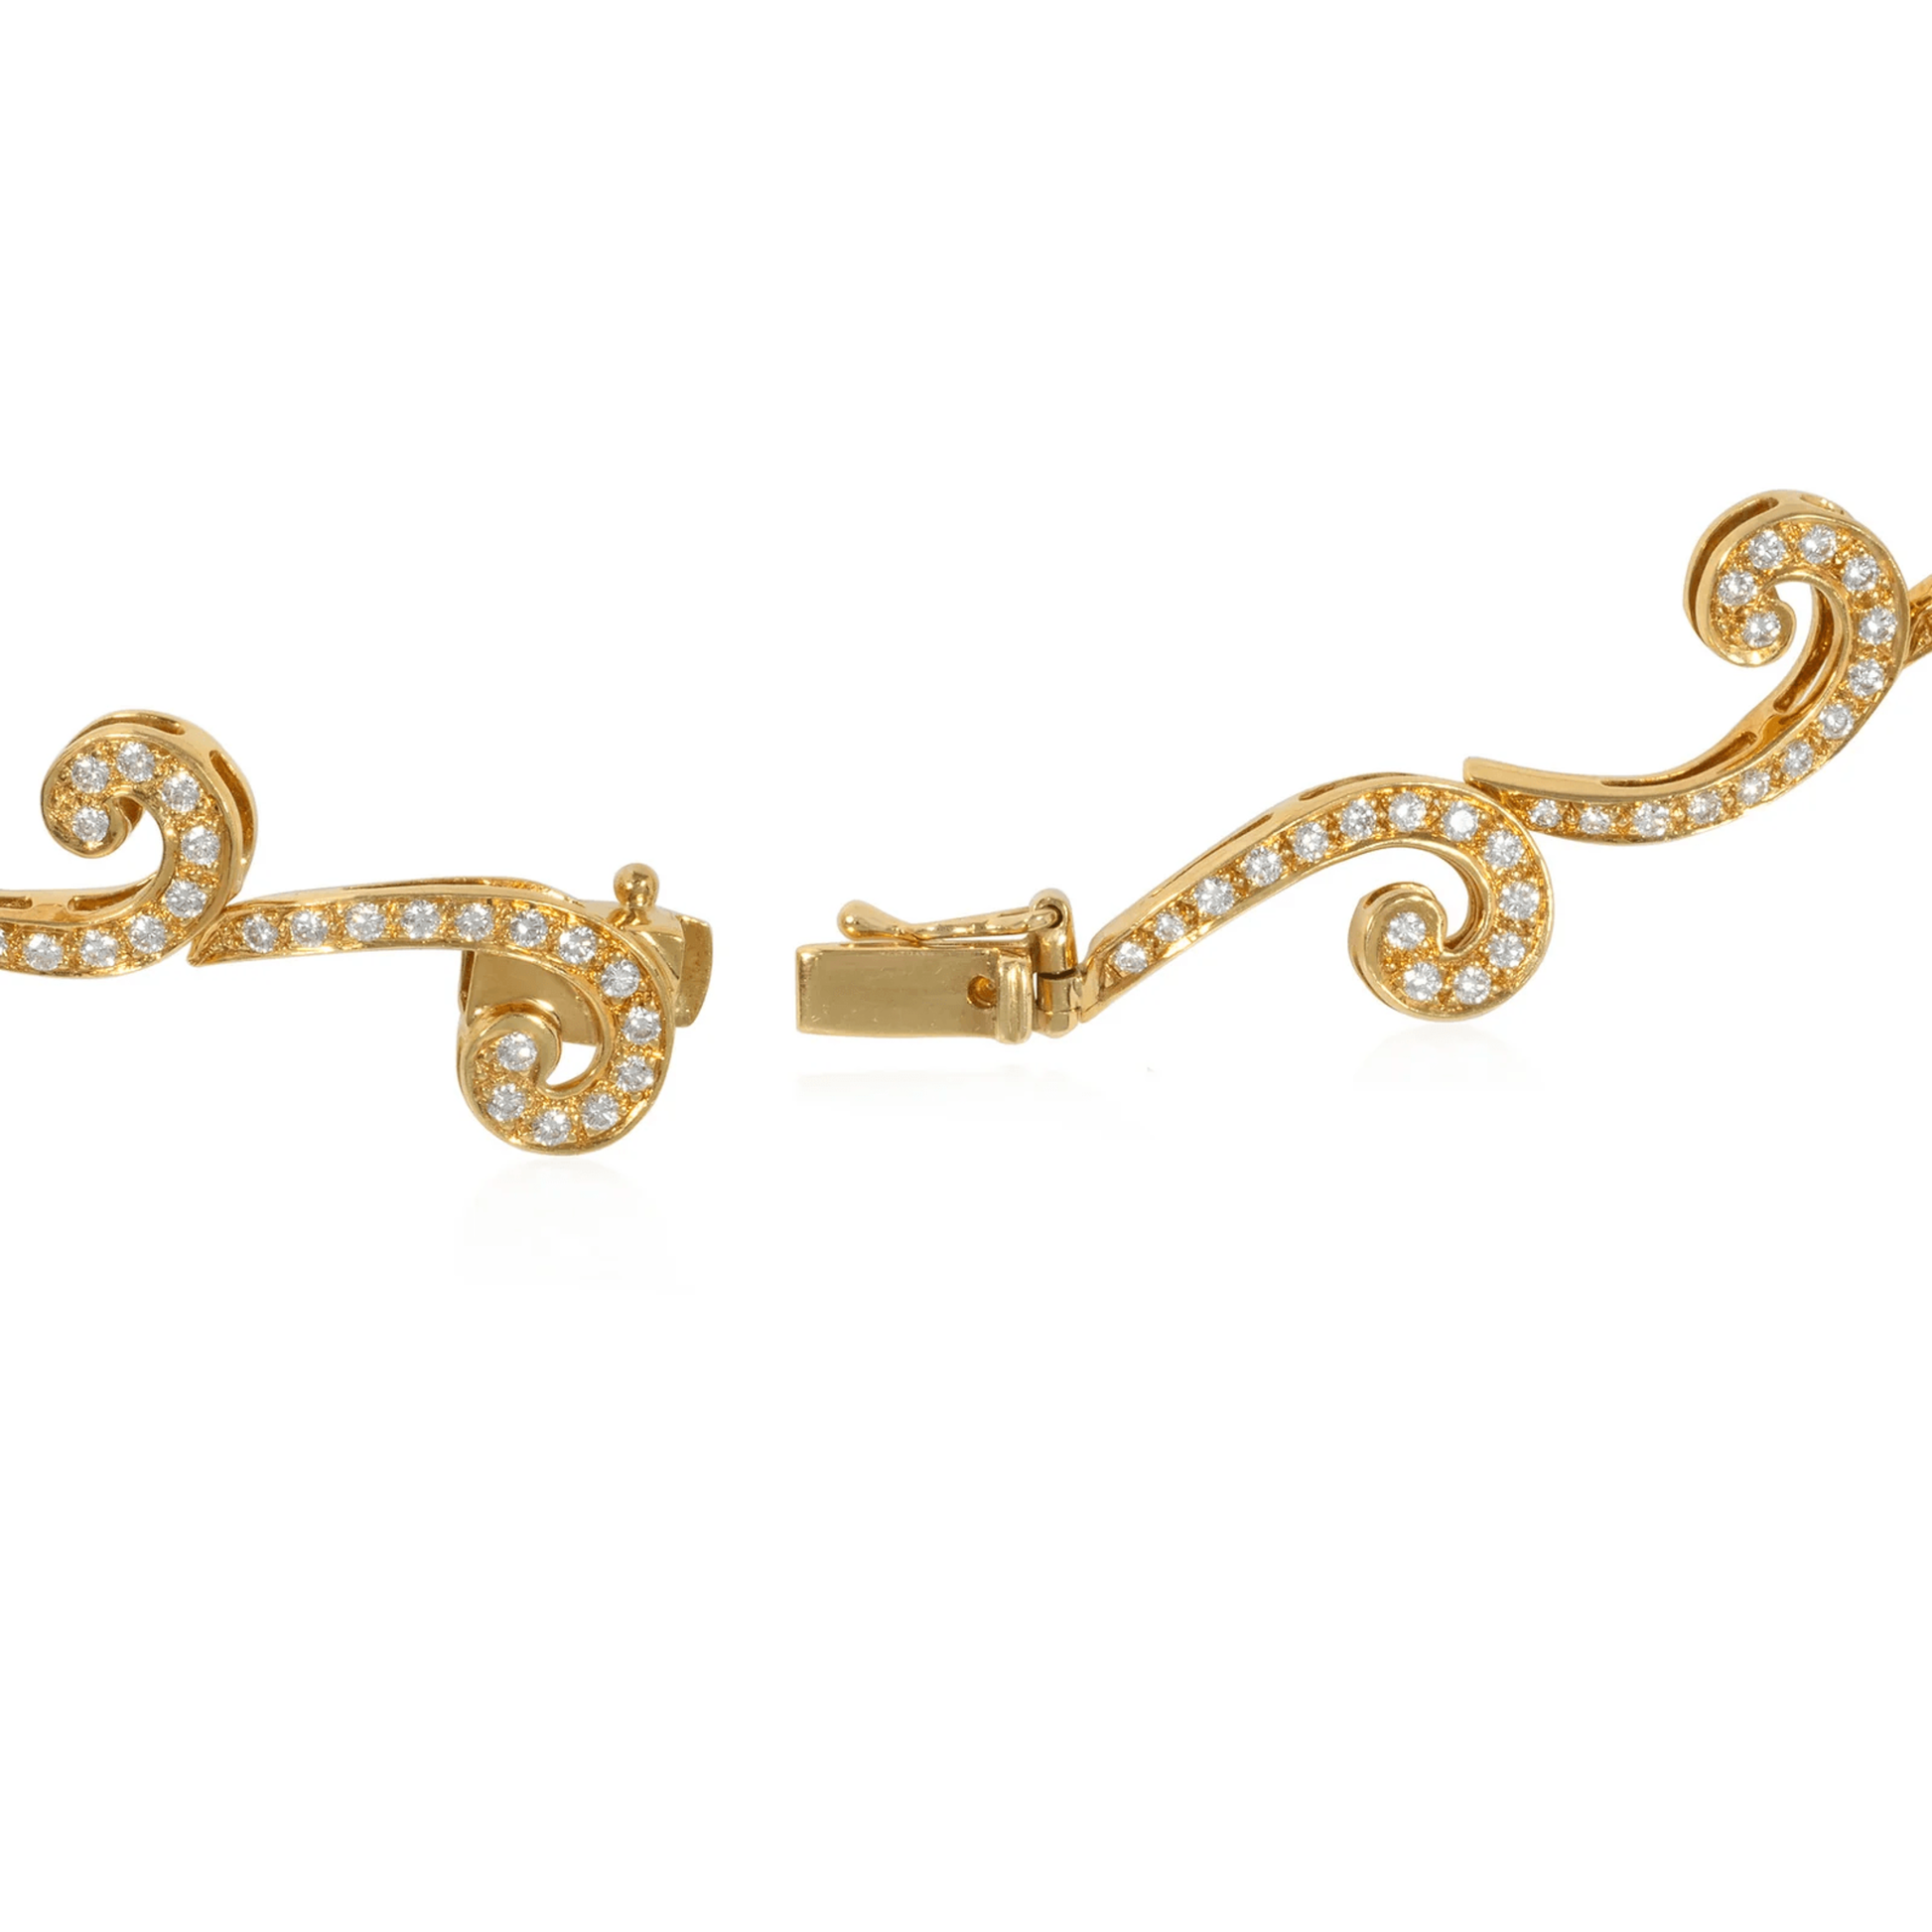 1960s 18KT Yellow Gold Diamond Necklace close-up of clasp